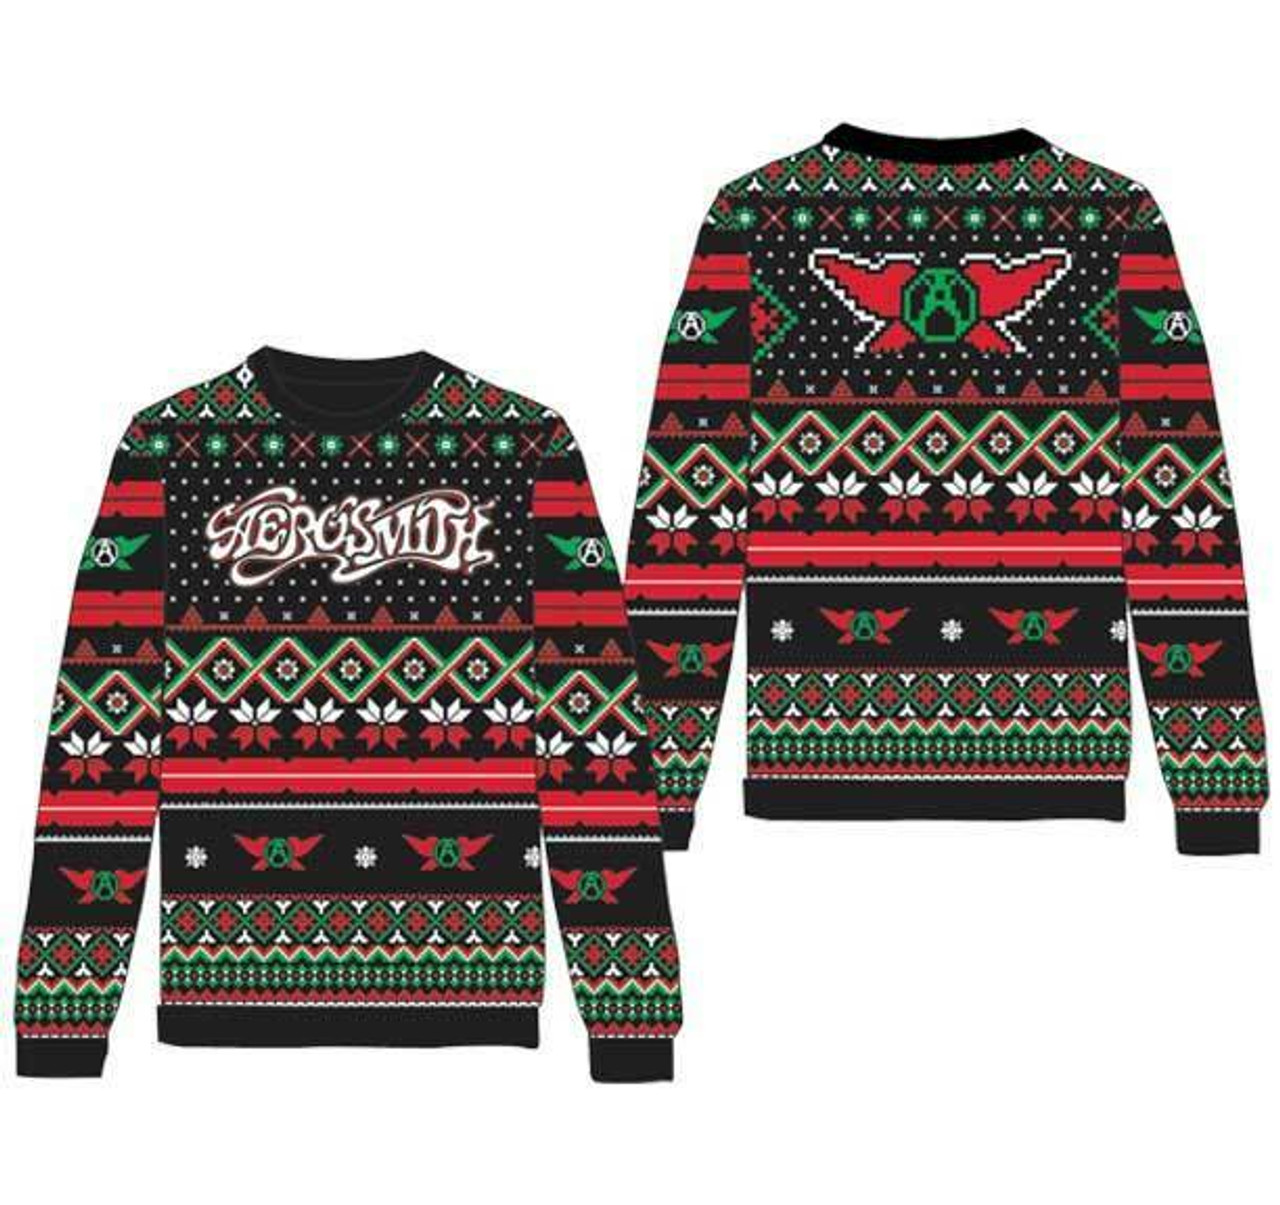 Aerosmith Rock and Roll Music Band Ugly Holiday Christmas Sweater 838440093  - Fearless Apparel